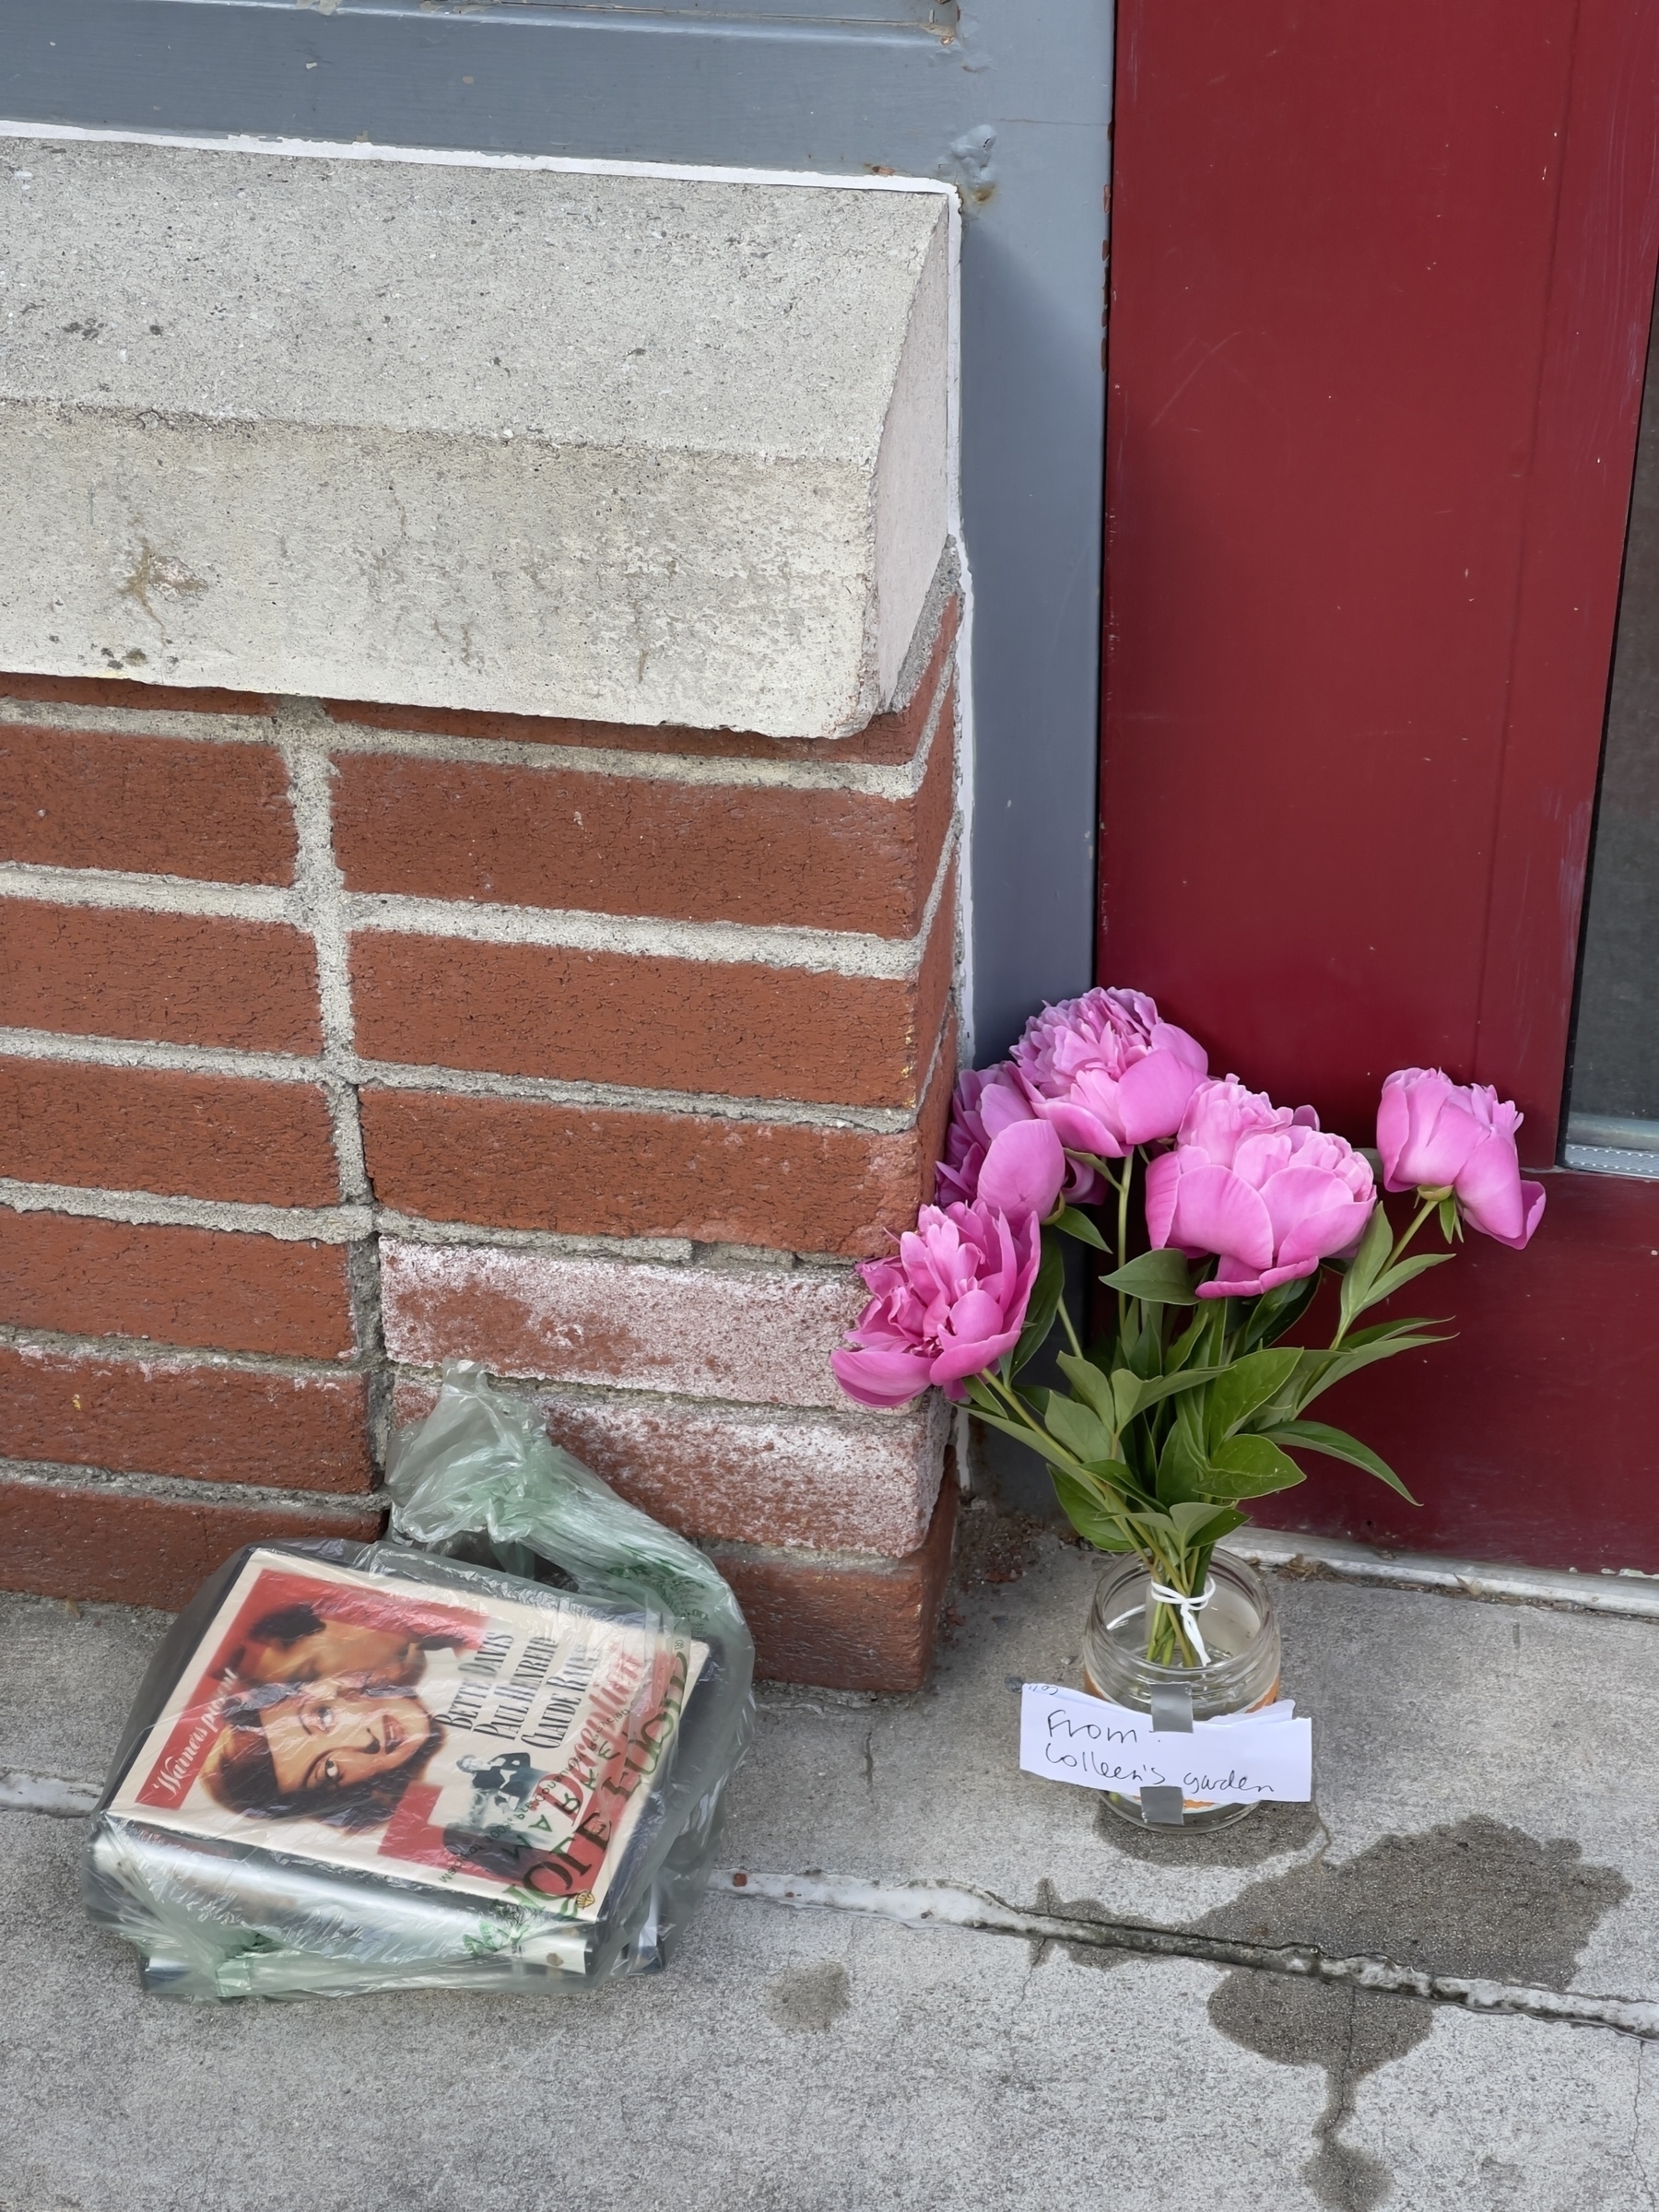 Books in a plastic bag, pink peony flowers in a glass jar by the door of a used bookstore.